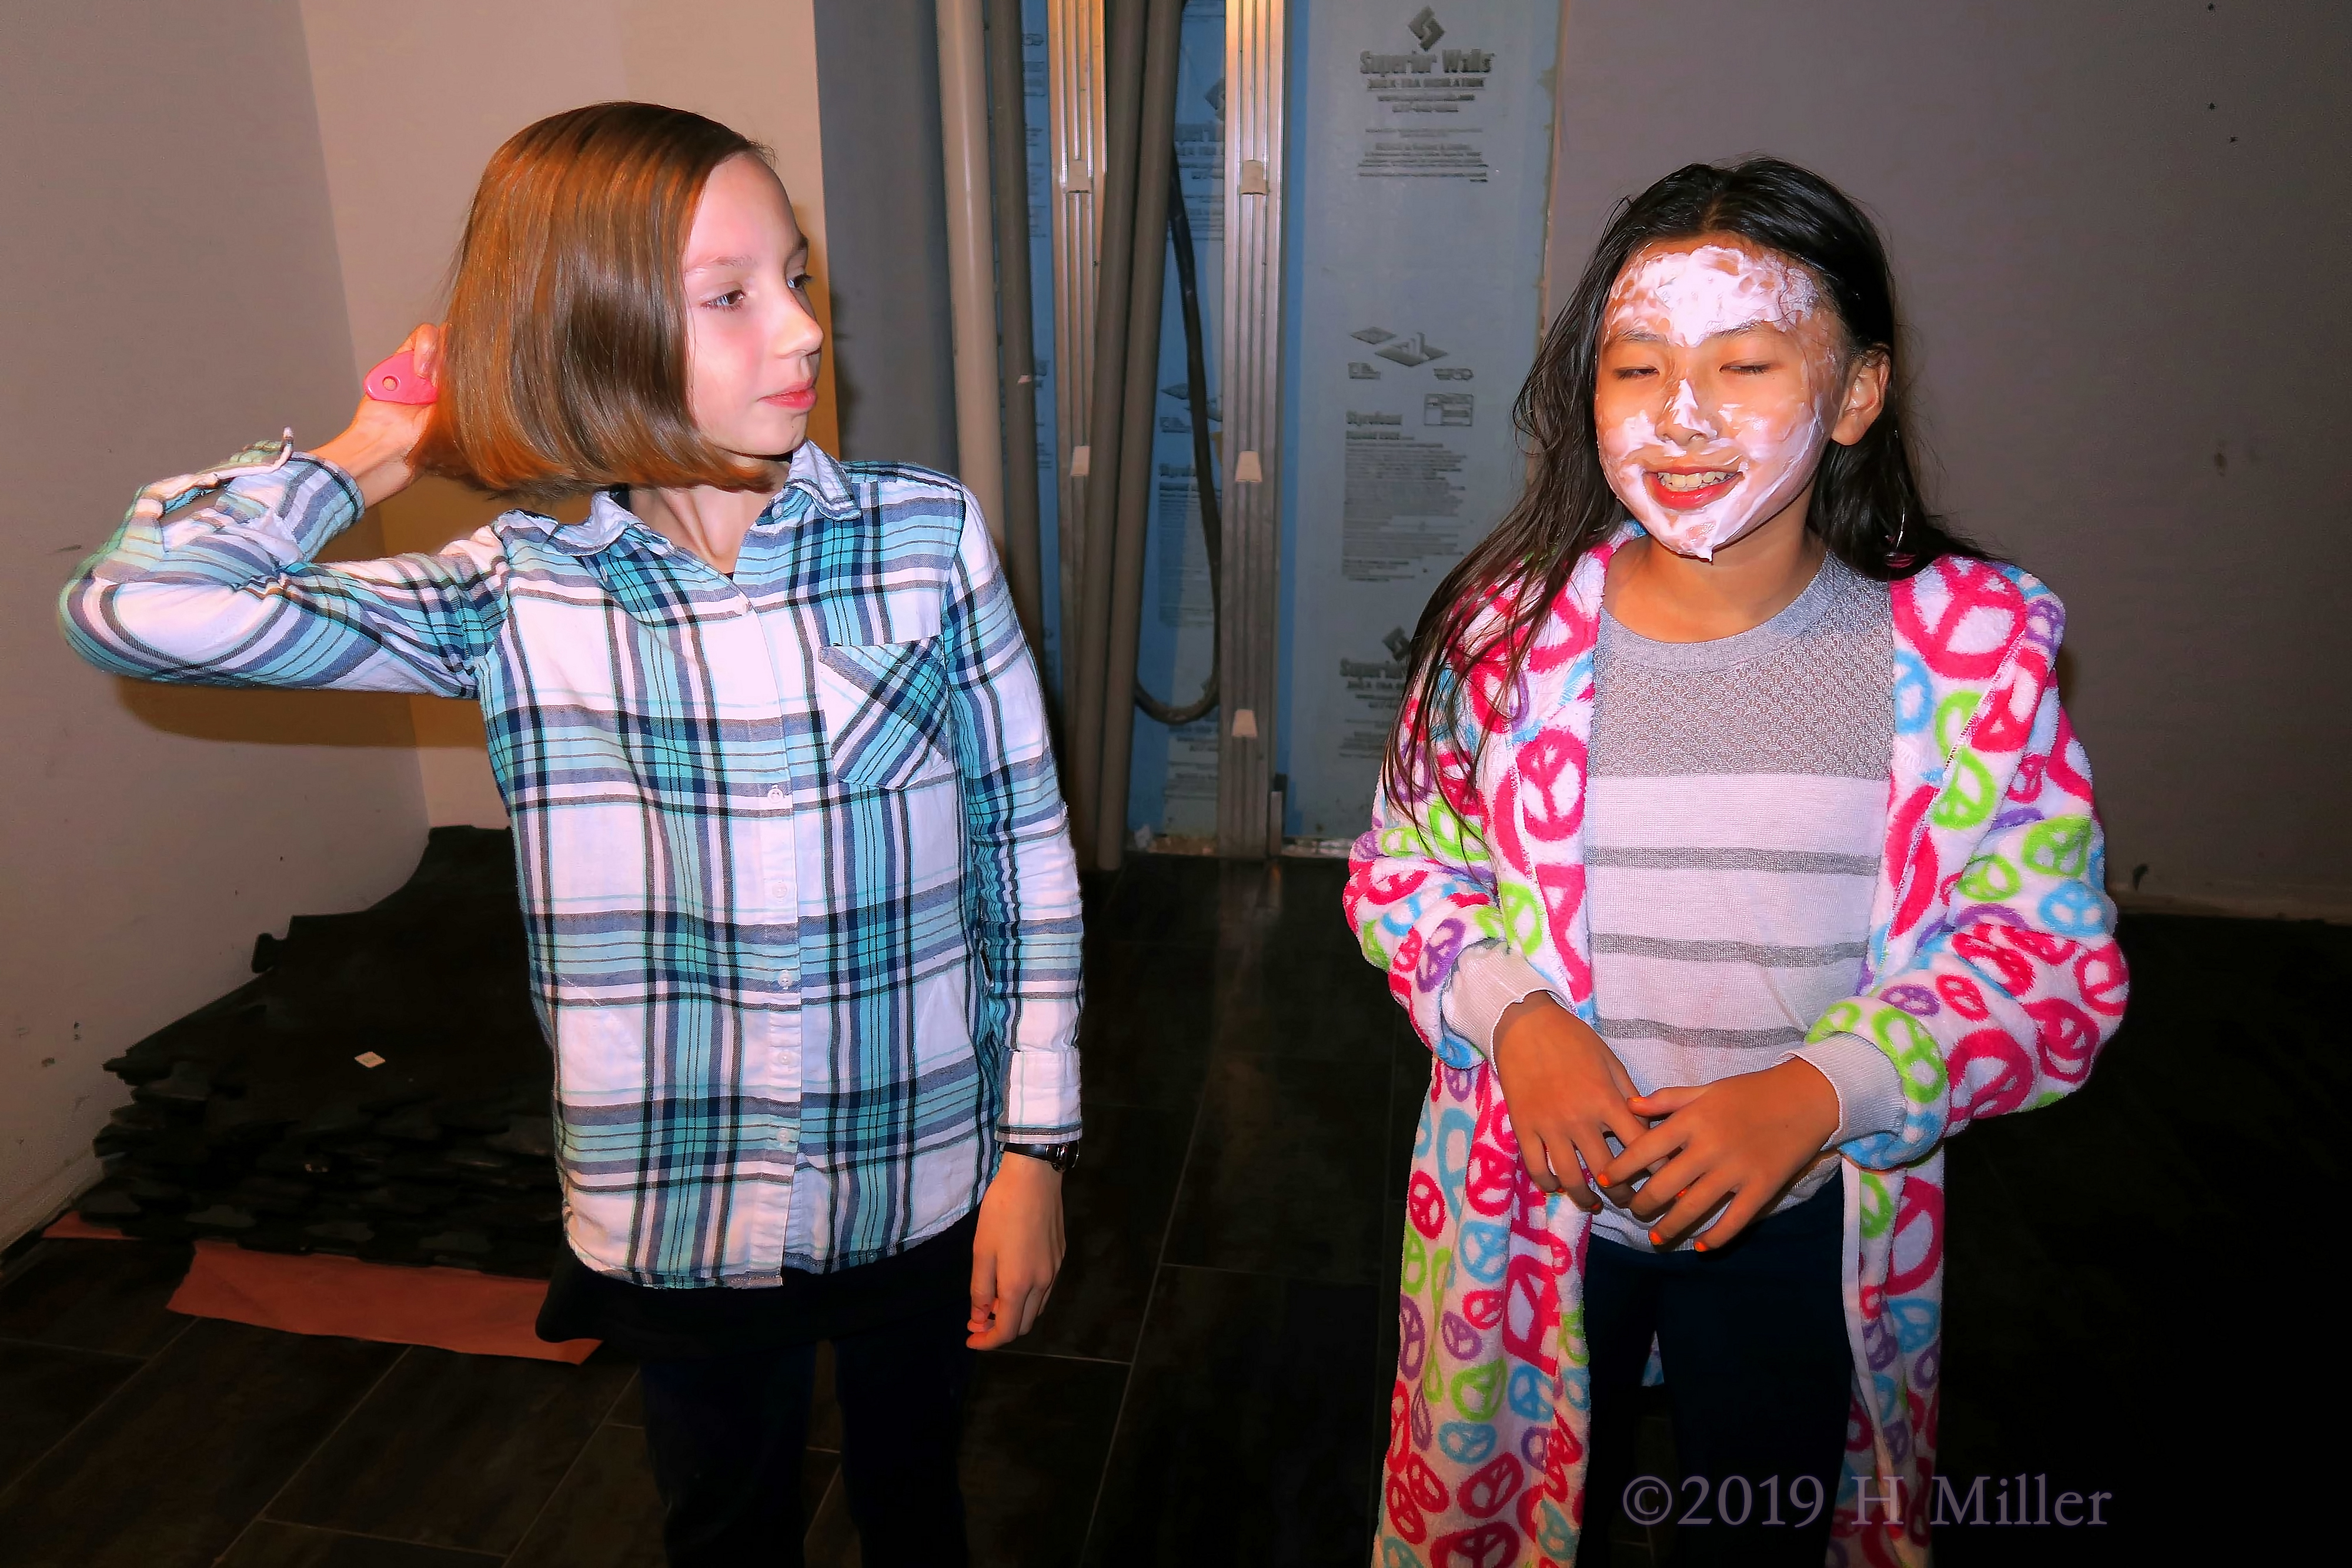 Glistening And Girl Chats! Kids Facial On This Spa Party Guest While Her Friend Looks On! 4